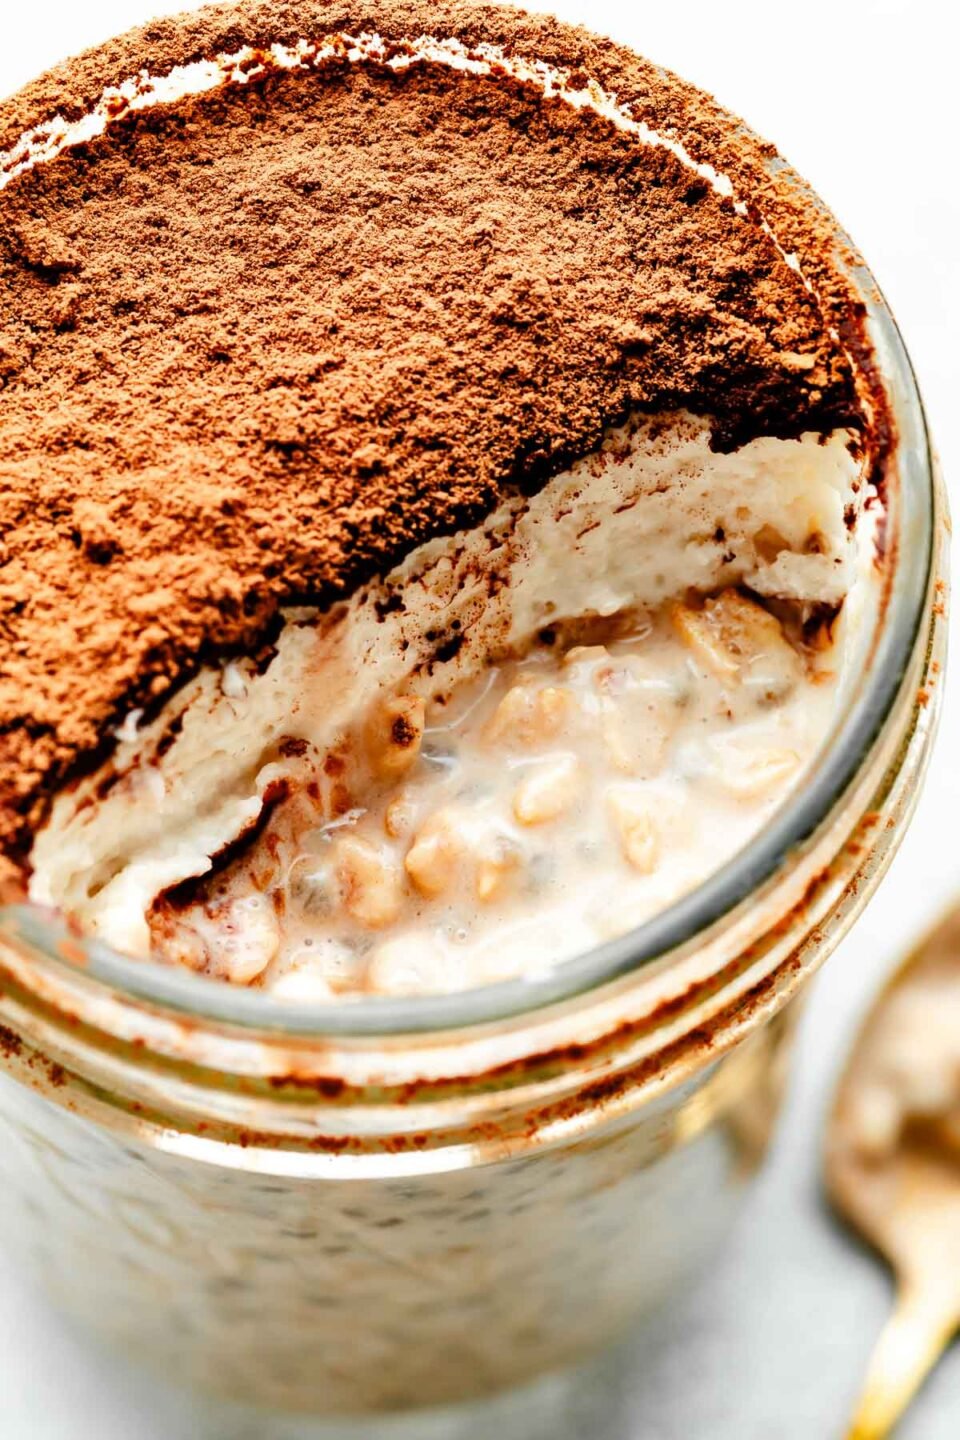 A close-up macro shot of a jar of tiramisu overnight oats with a spoonful taken out. The layers of whipped cream and espresso powder are visible over the oats.